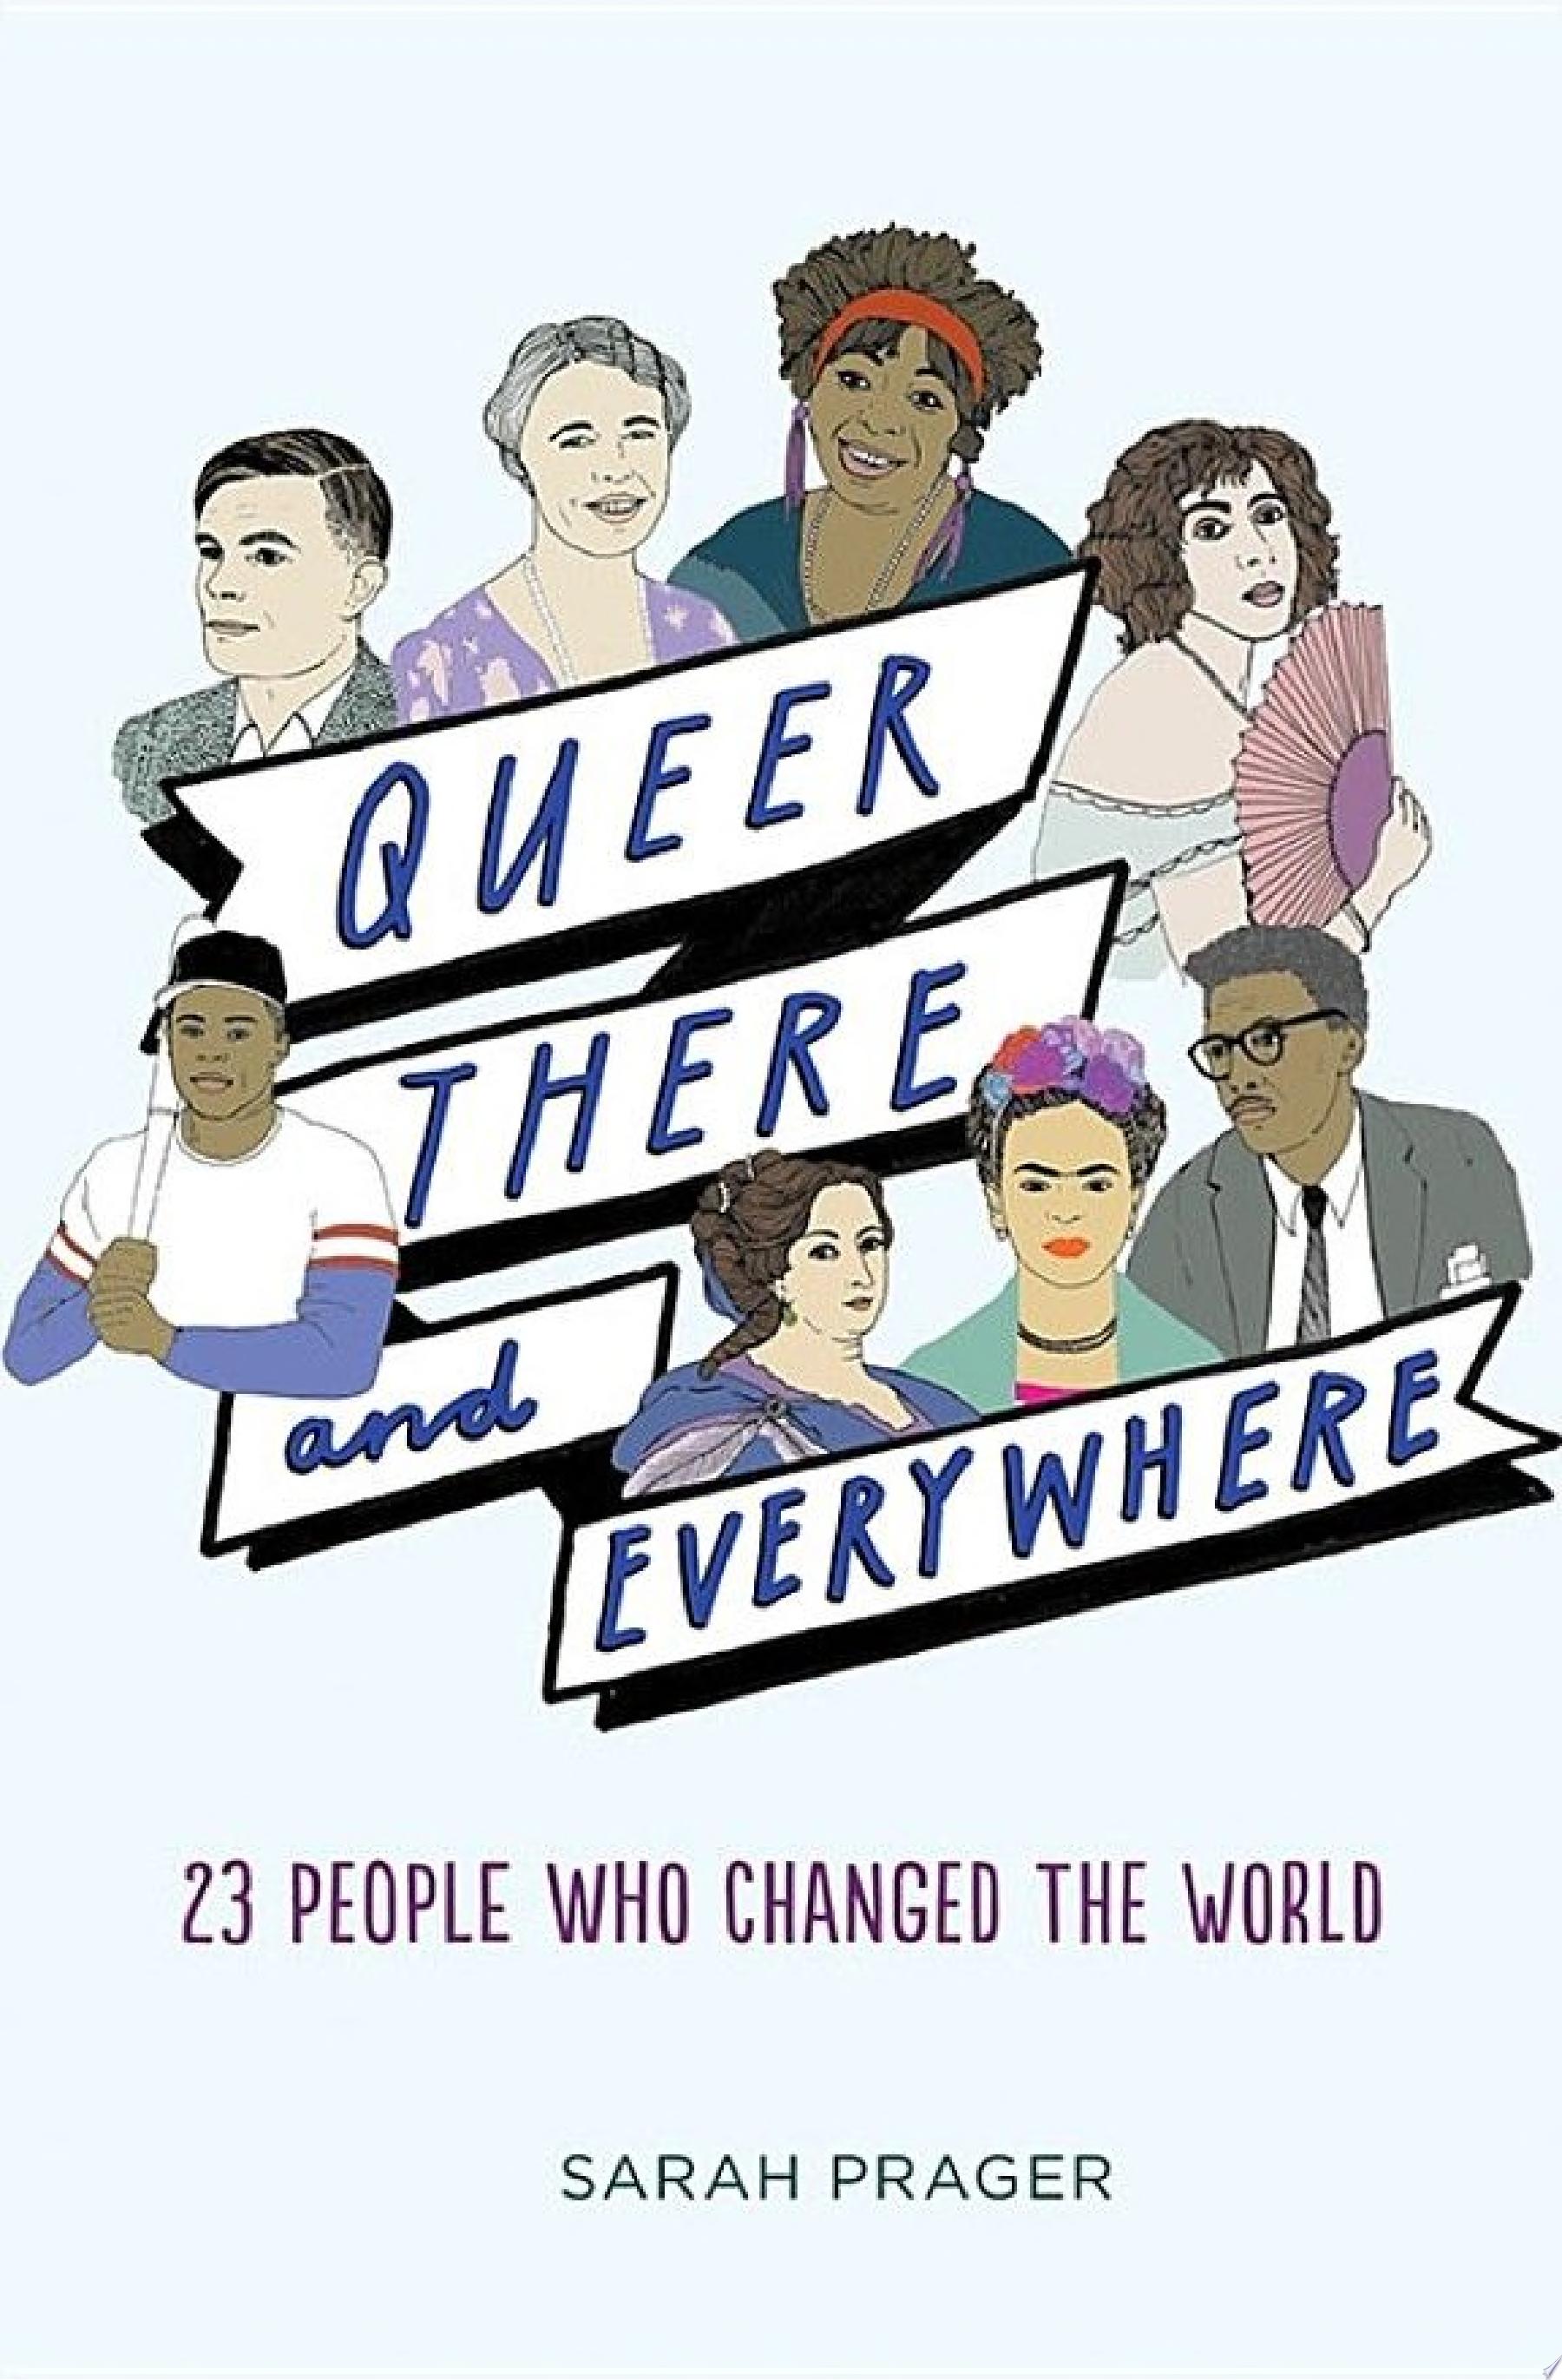 Image for "Queer, There, and Everywhere"